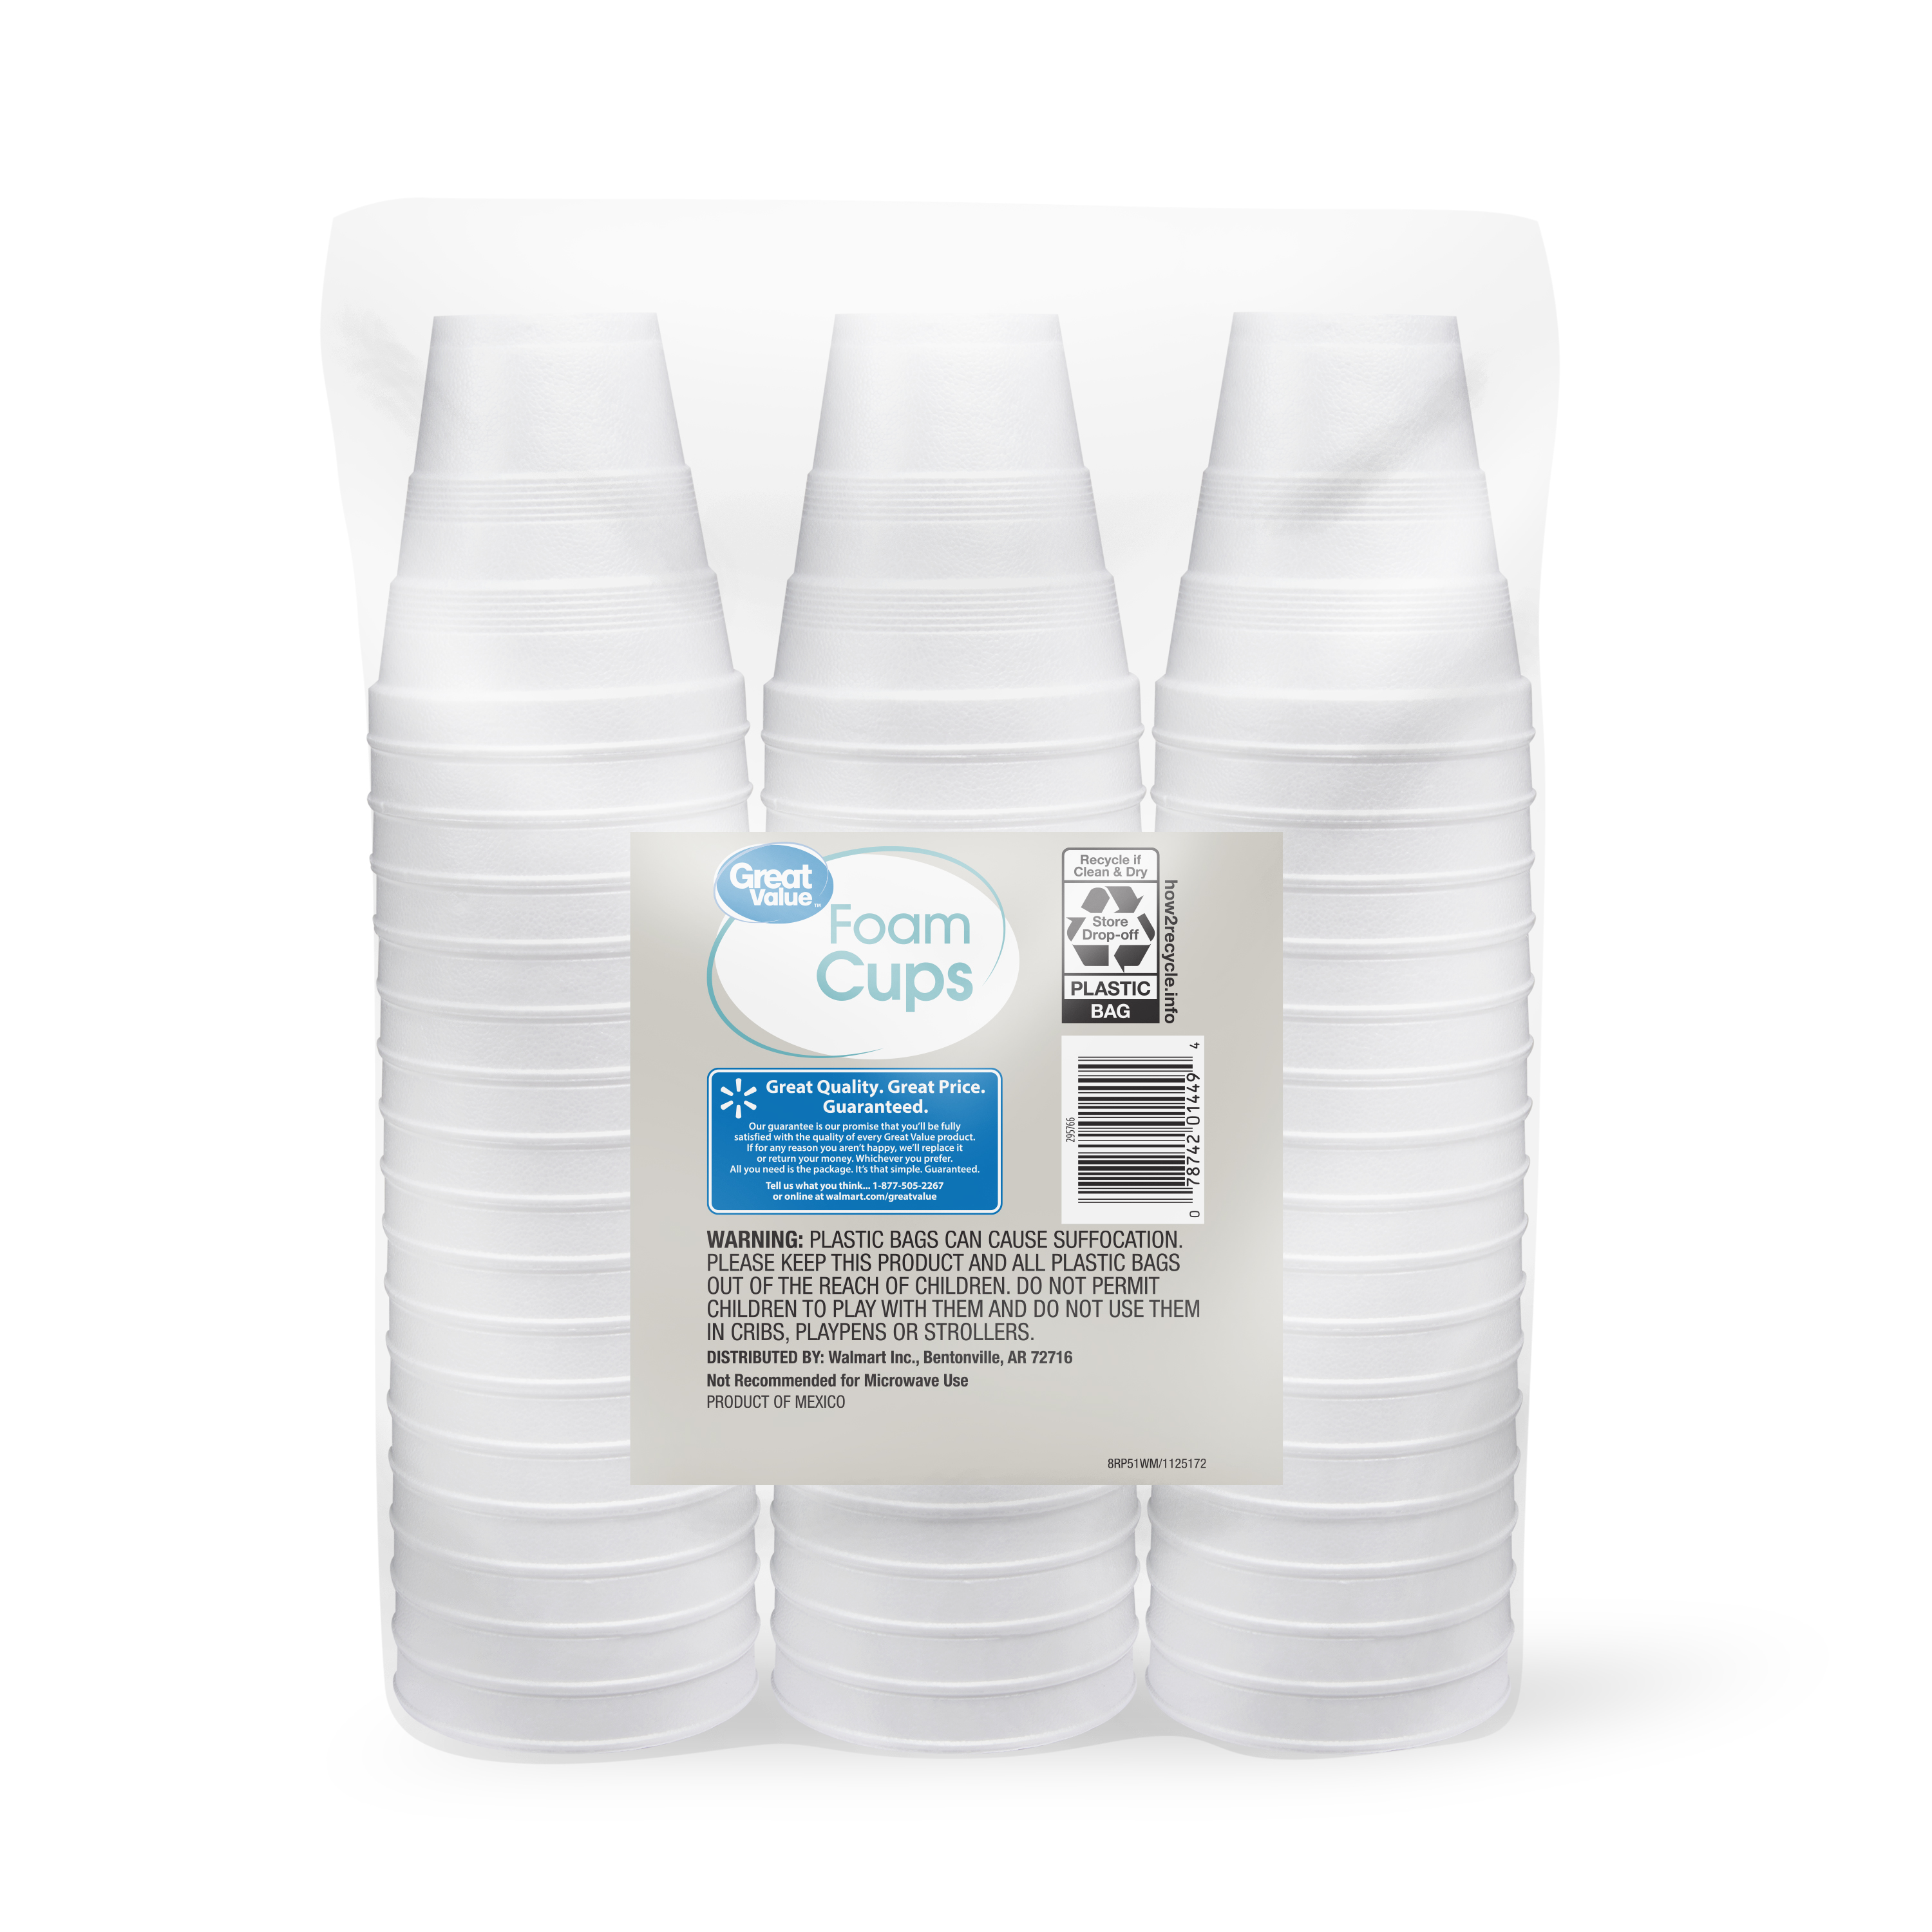 Great Value Disposable Foam Cups, 8 Ounce, 50 Count - image 5 of 8